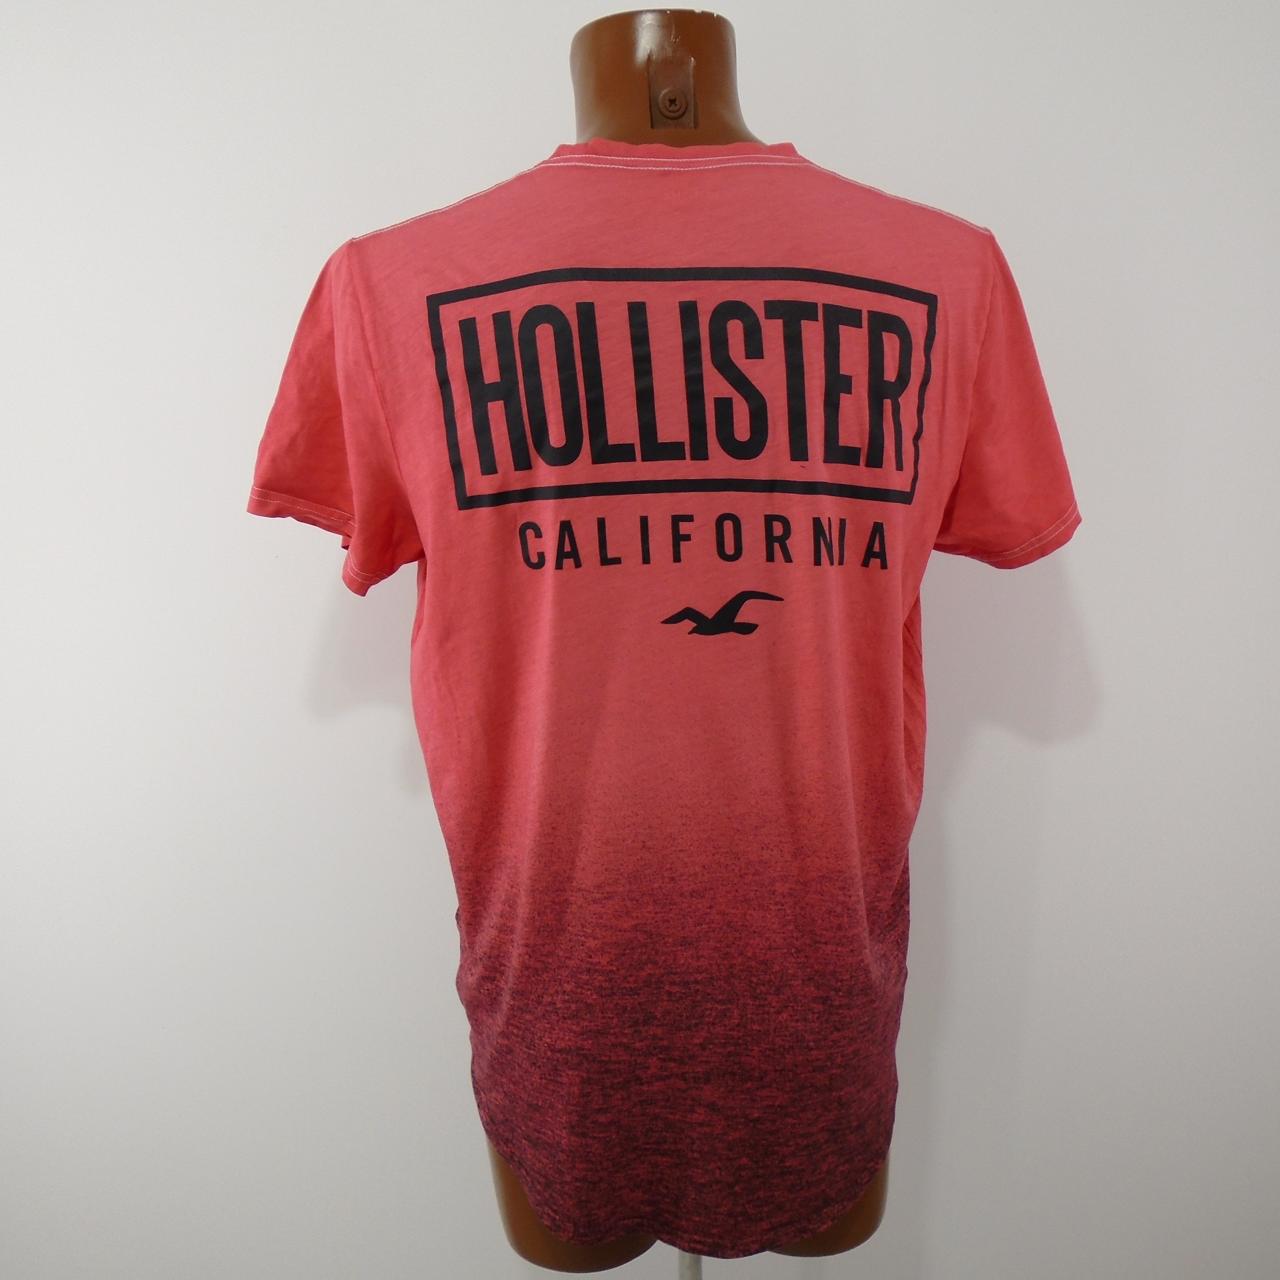 Men's T-Shirt Hollister. Red. M. Used. Good